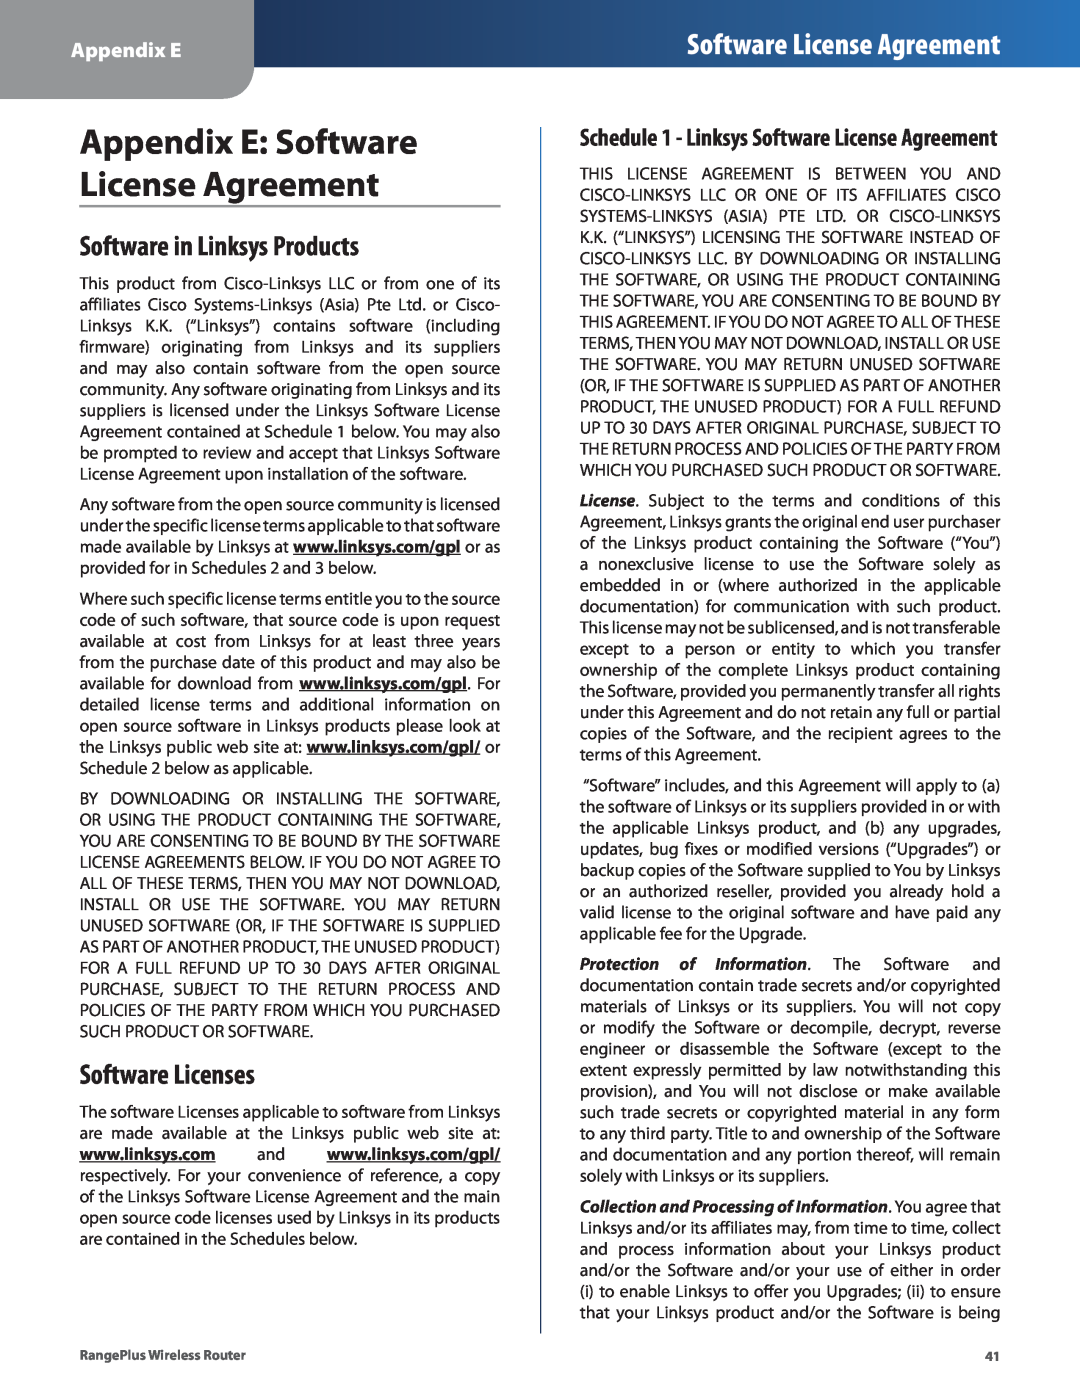 Cisco Systems WRT110 manual Appendix E Software License Agreement, Software in Linksys Products, Software Licenses 